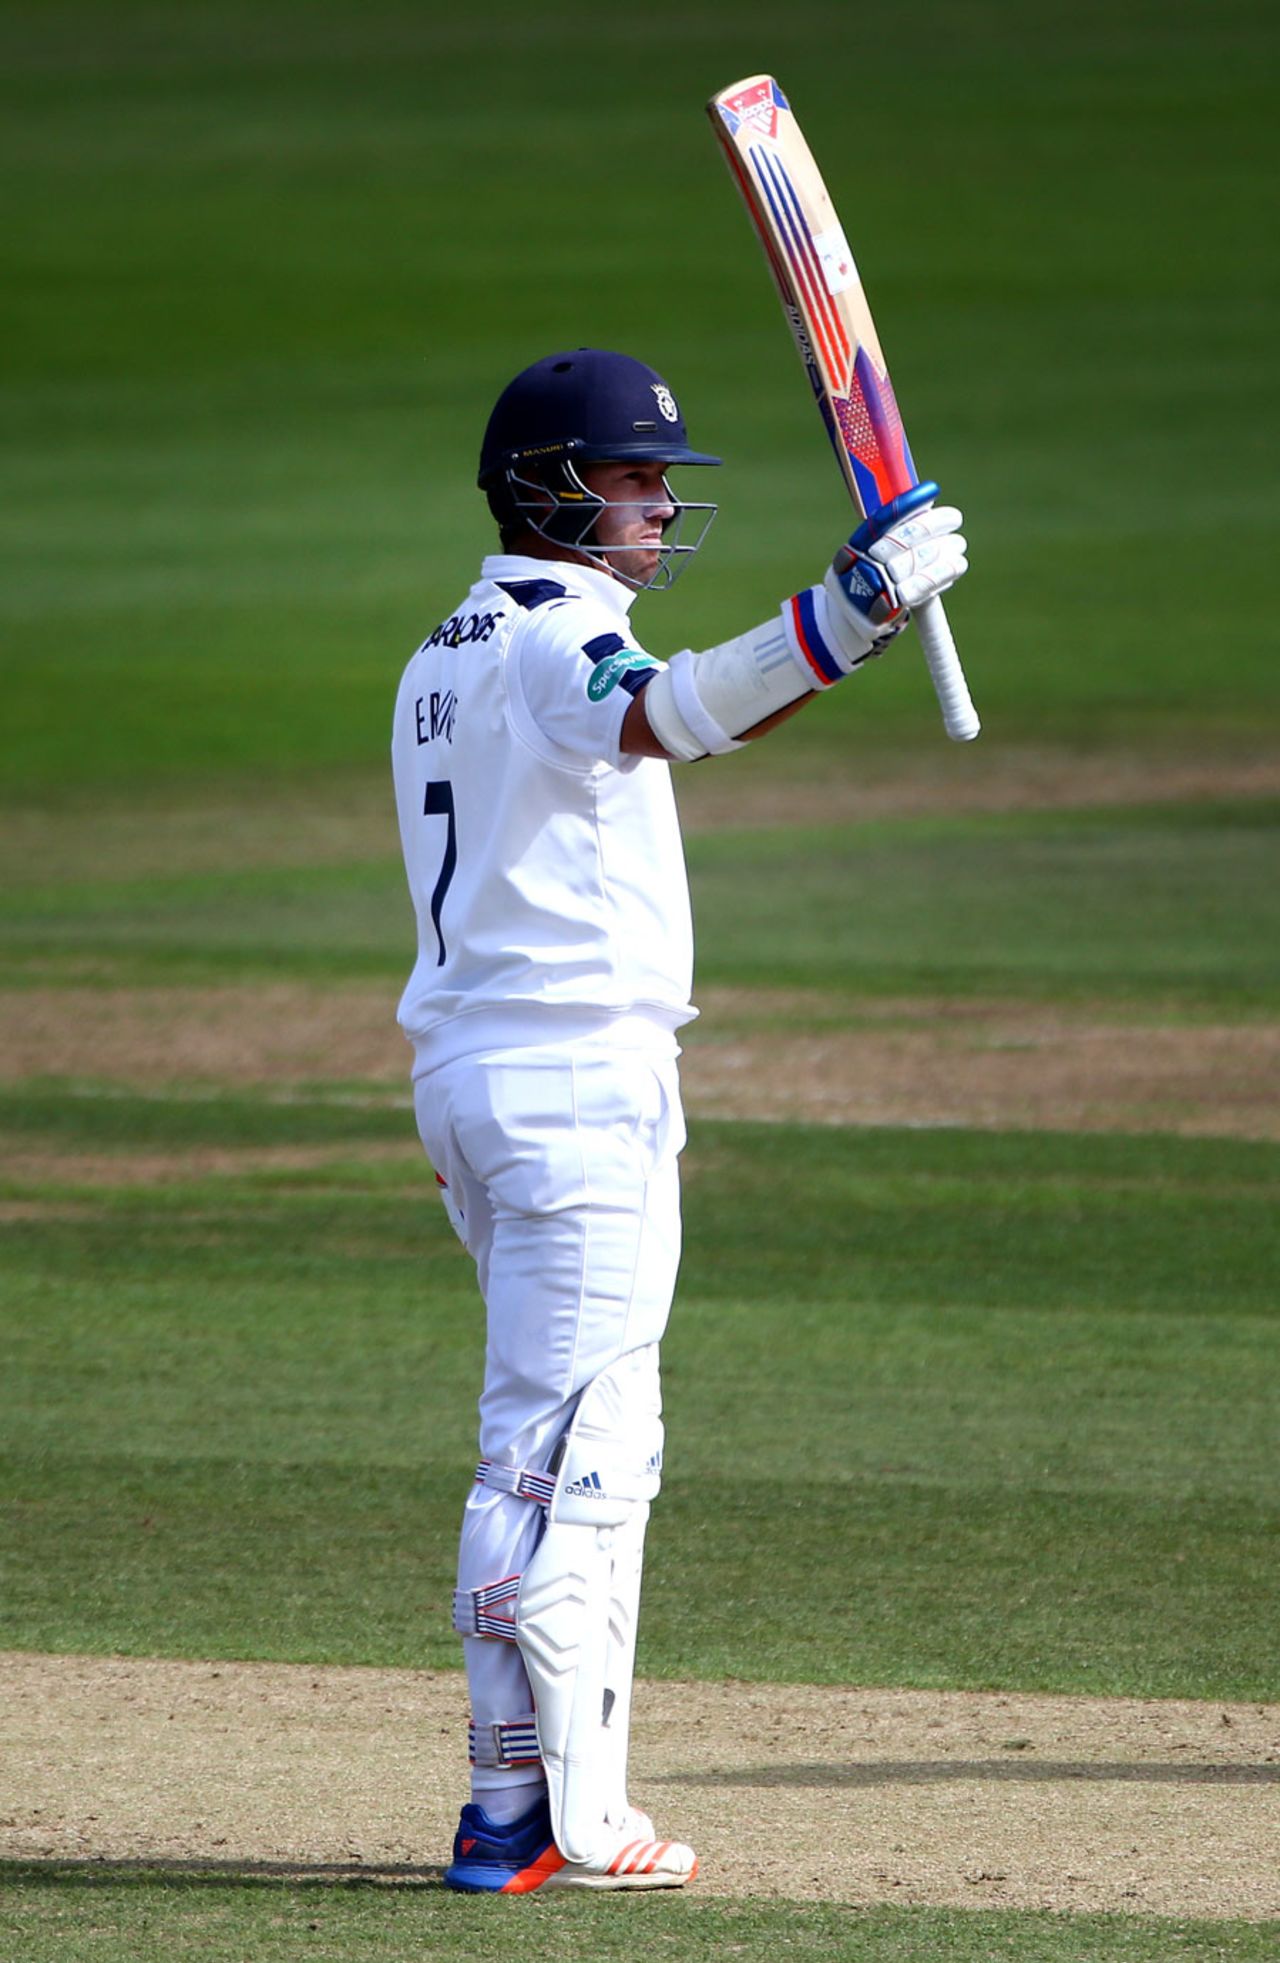 Sean Ervine acknowledges his fifty, Hampshire v Yorkshire, County Championship, Division One, Ageas Bowl, 2nd day, September 1, 2016